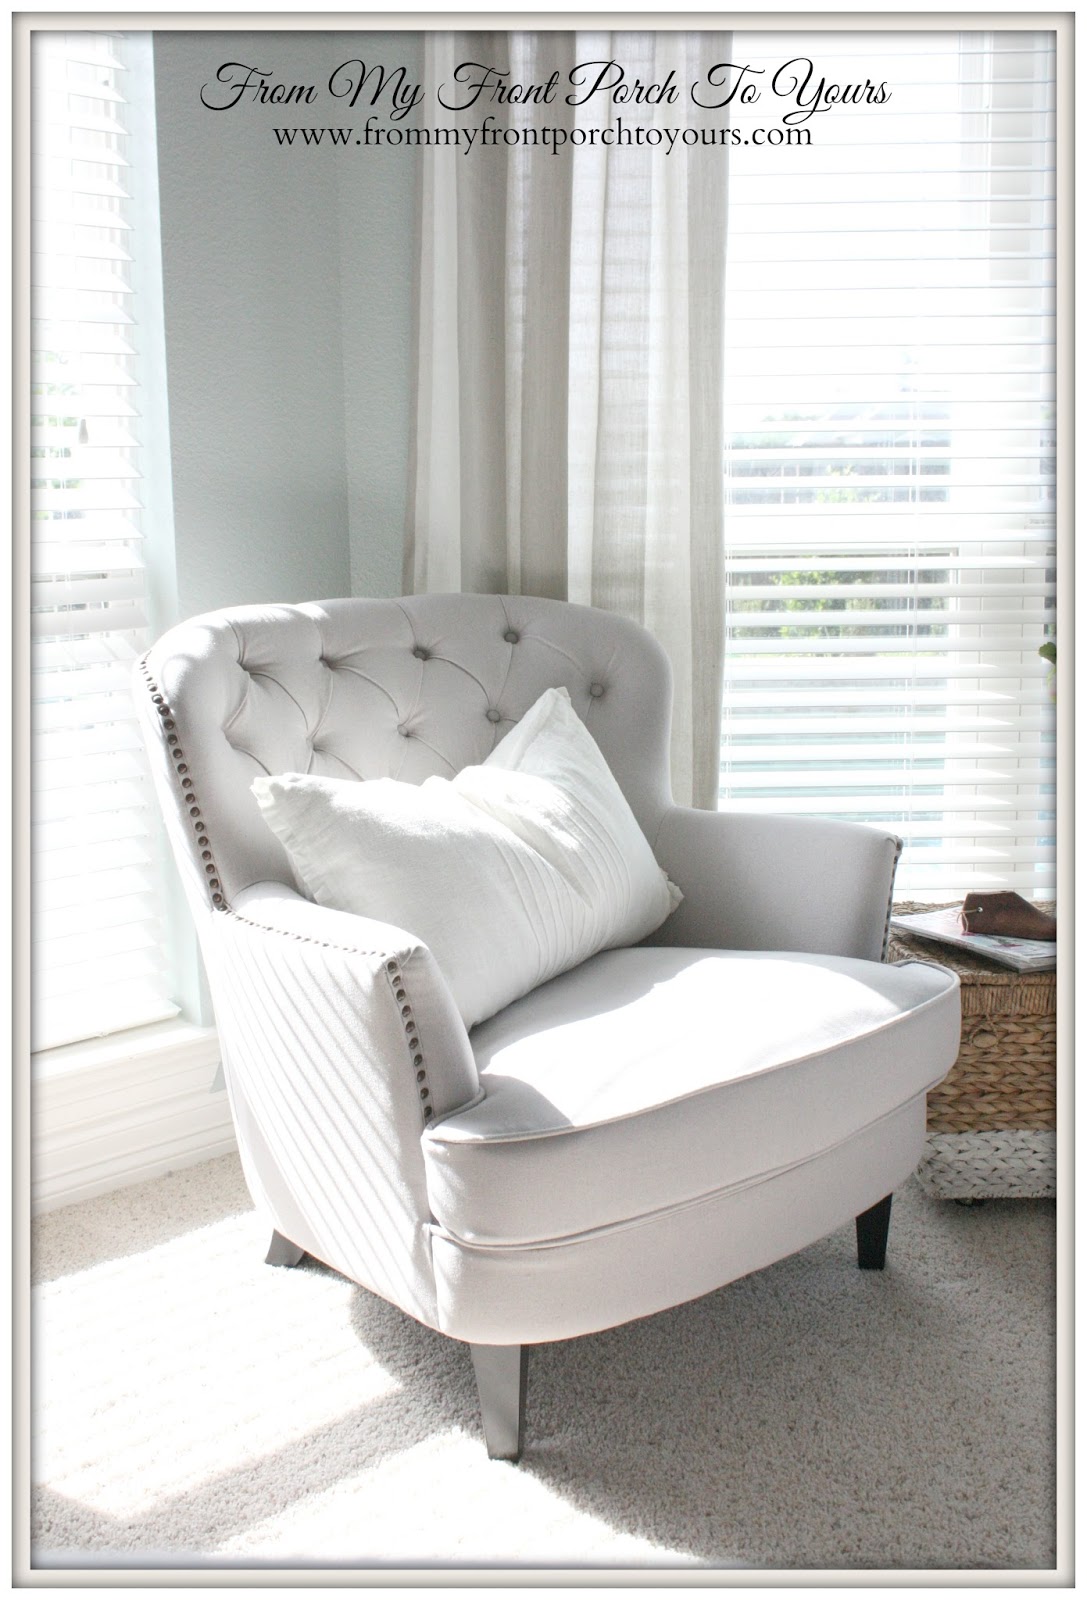 From My Front Porch To Yours- Bedroom Reading Nook- Joss & Main Chair